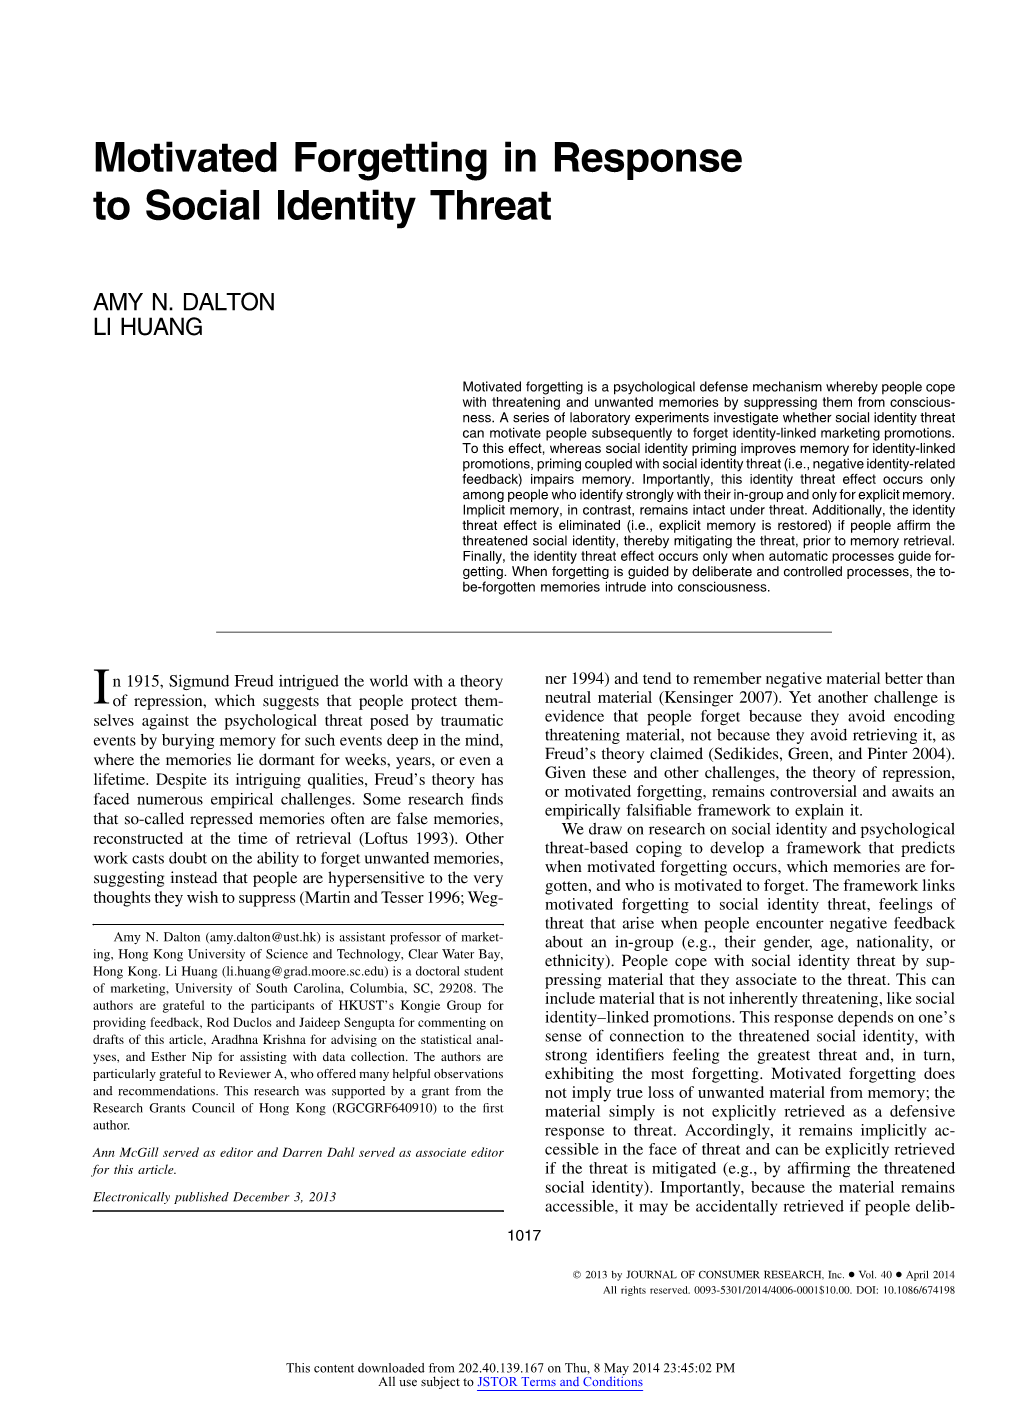 Motivated Forgetting in Response to Social Identity Threat